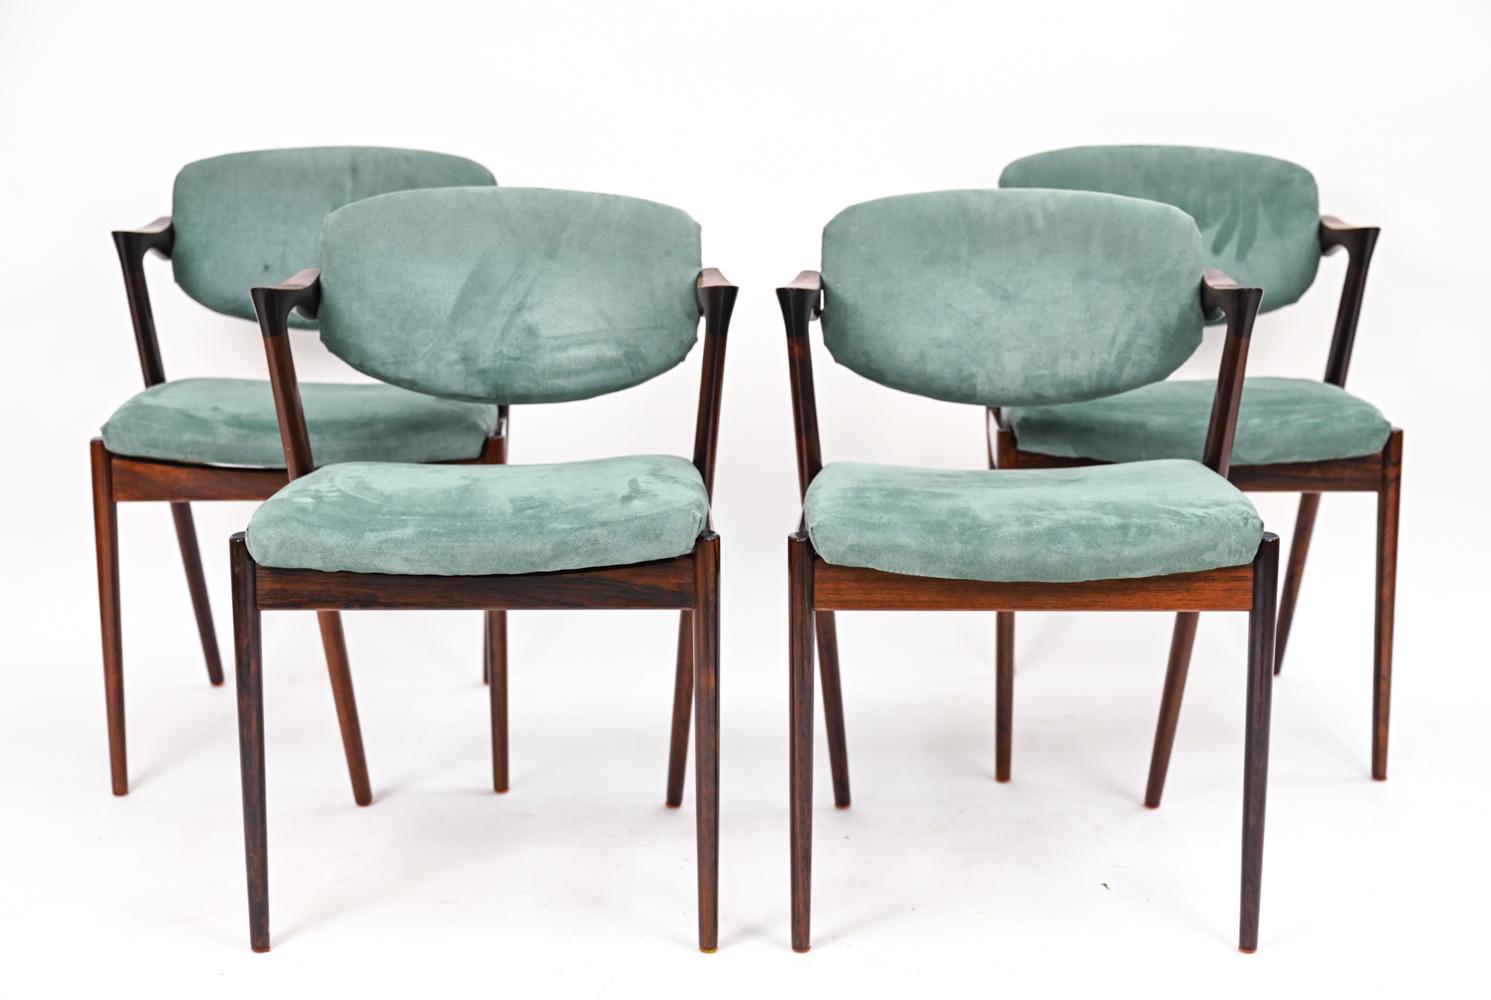 A striking set of four Danish mid-century dining chairs designed by Kai Kristiansen. These iconic Model 42, or 